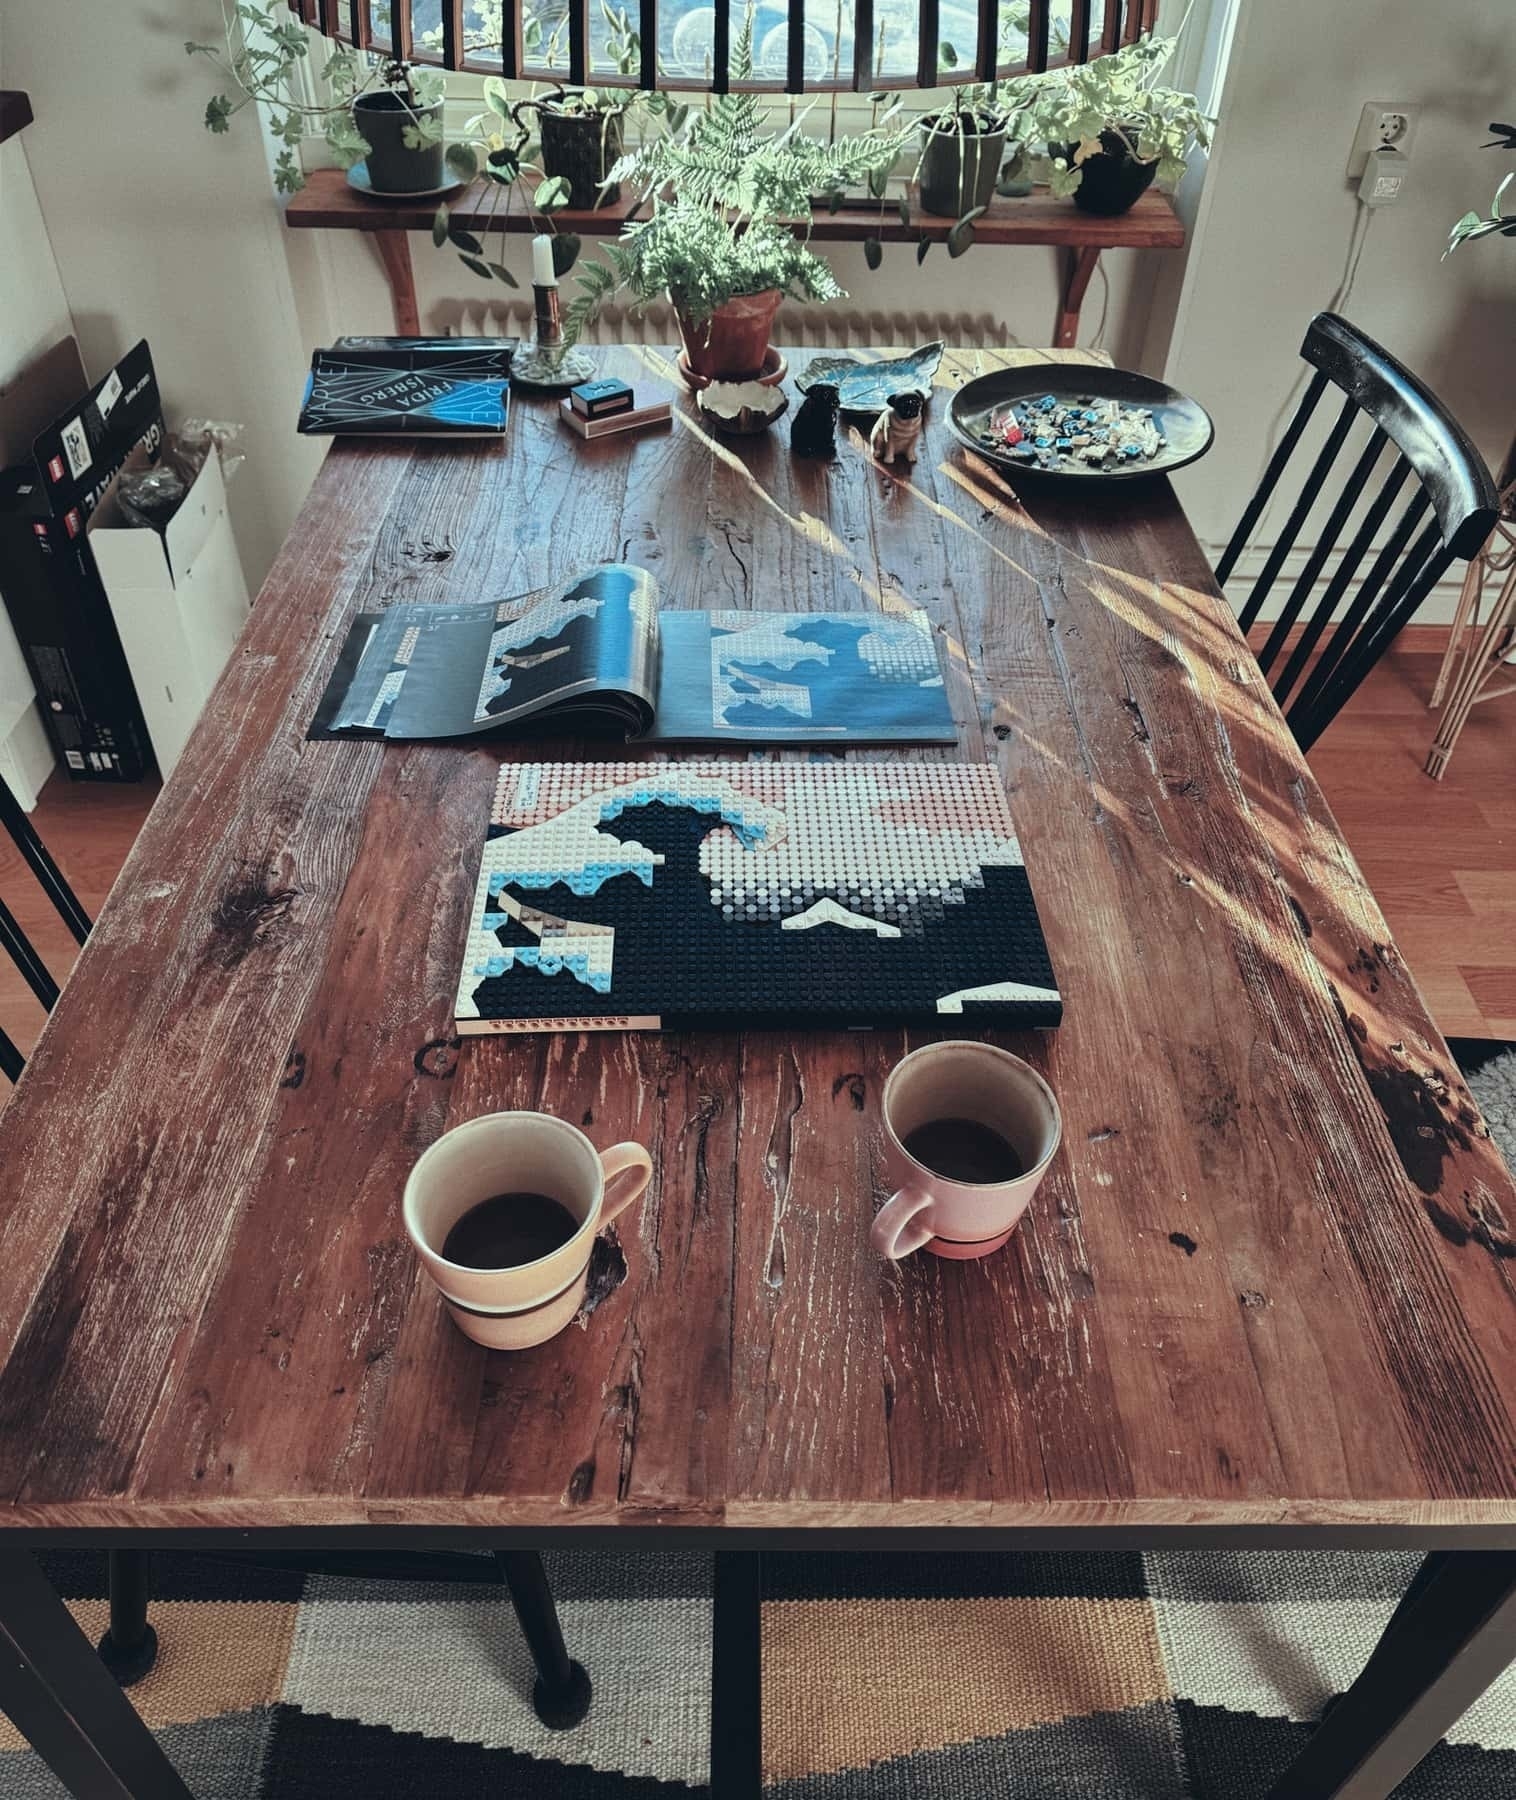 A wooden dining table with two cups of coffee and a partially completed Lego build of Hokusai’s The Great Wave.